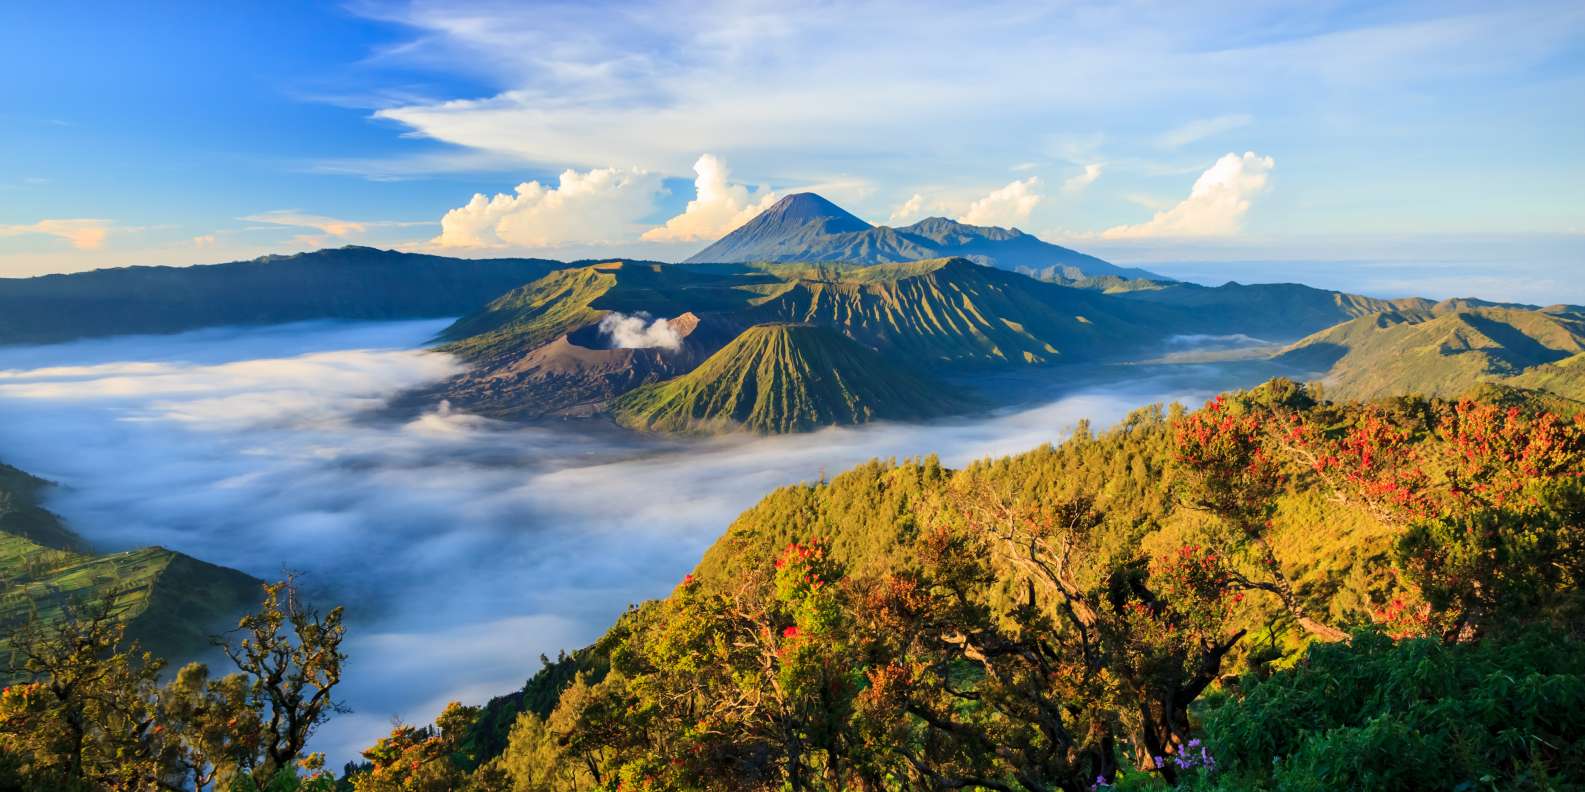 The BEST Indonesia Nature & adventure 2023  FREE Cancellation GetYourGuide